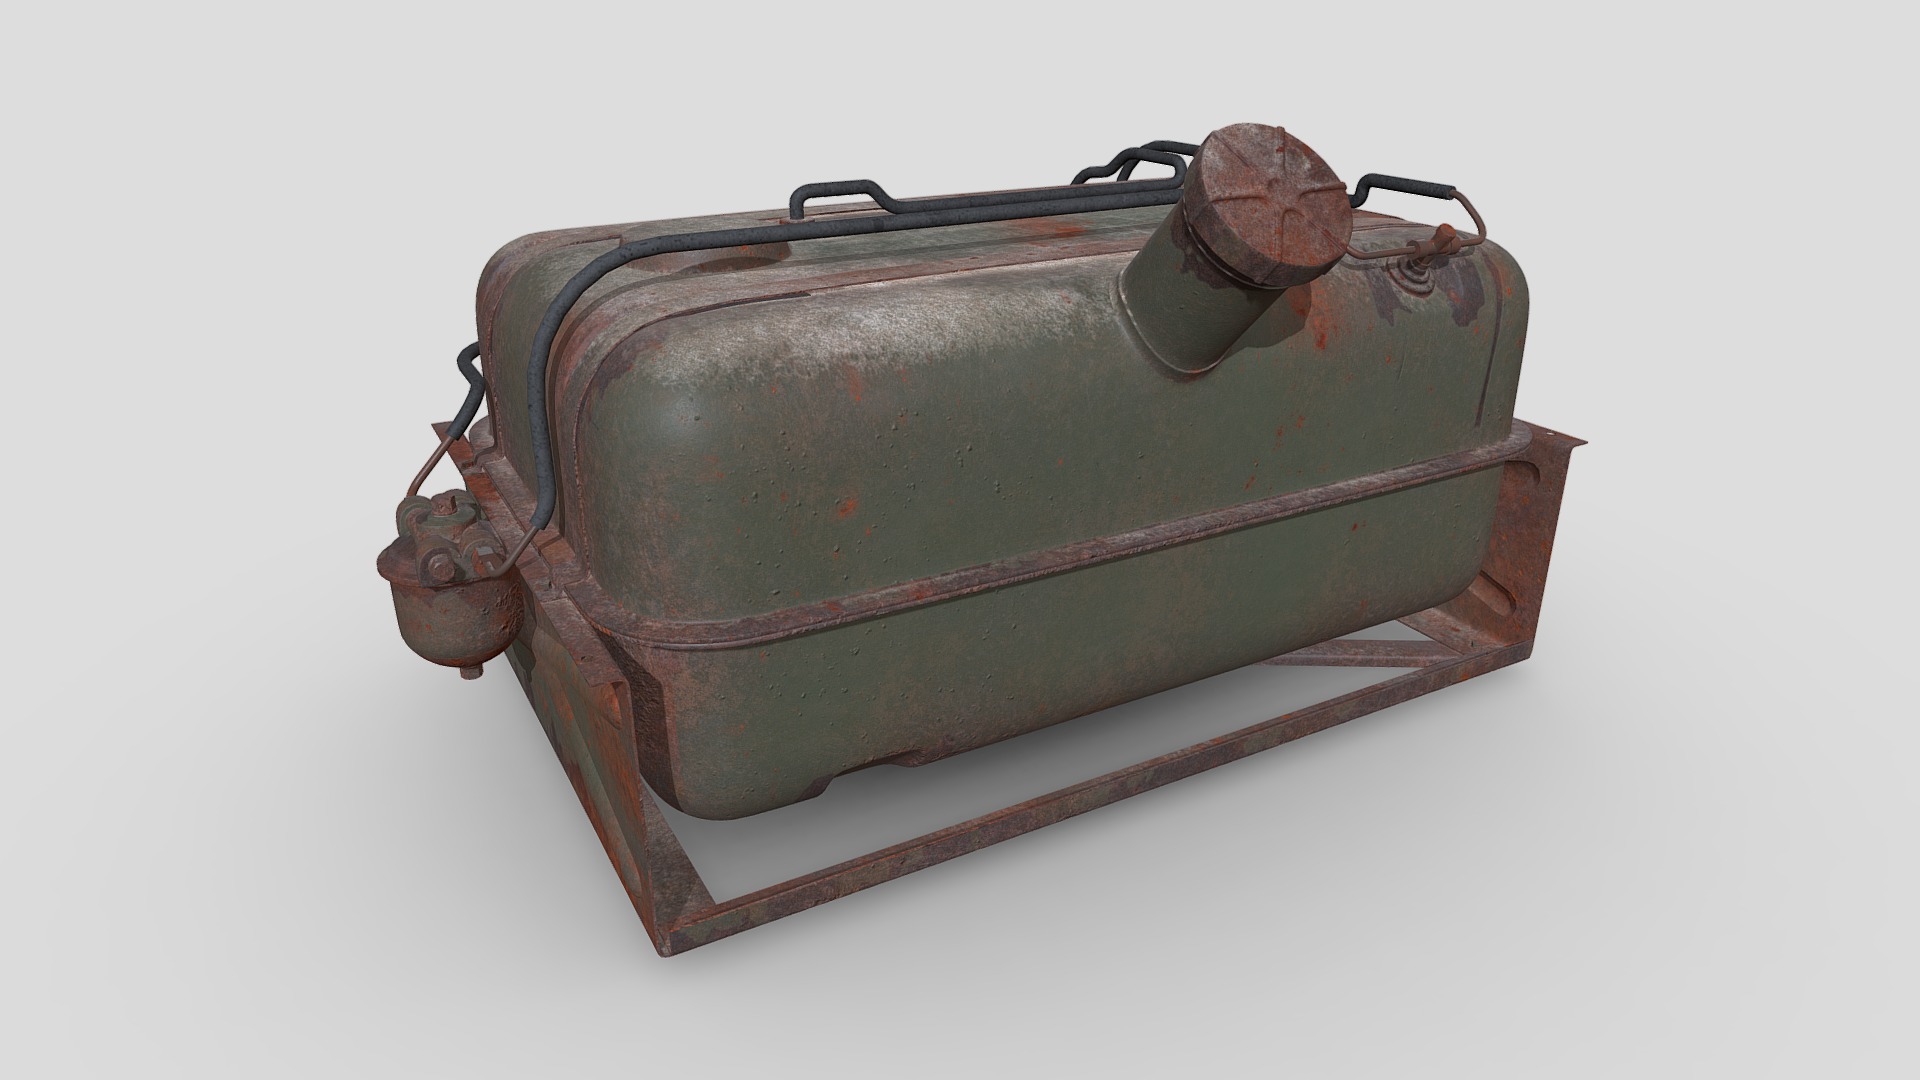 3D model ZIL 157 Fuel tank_Rusty_Green - This is a 3D model of the ZIL 157 Fuel tank_Rusty_Green. The 3D model is about a brown suitcase with a handle.